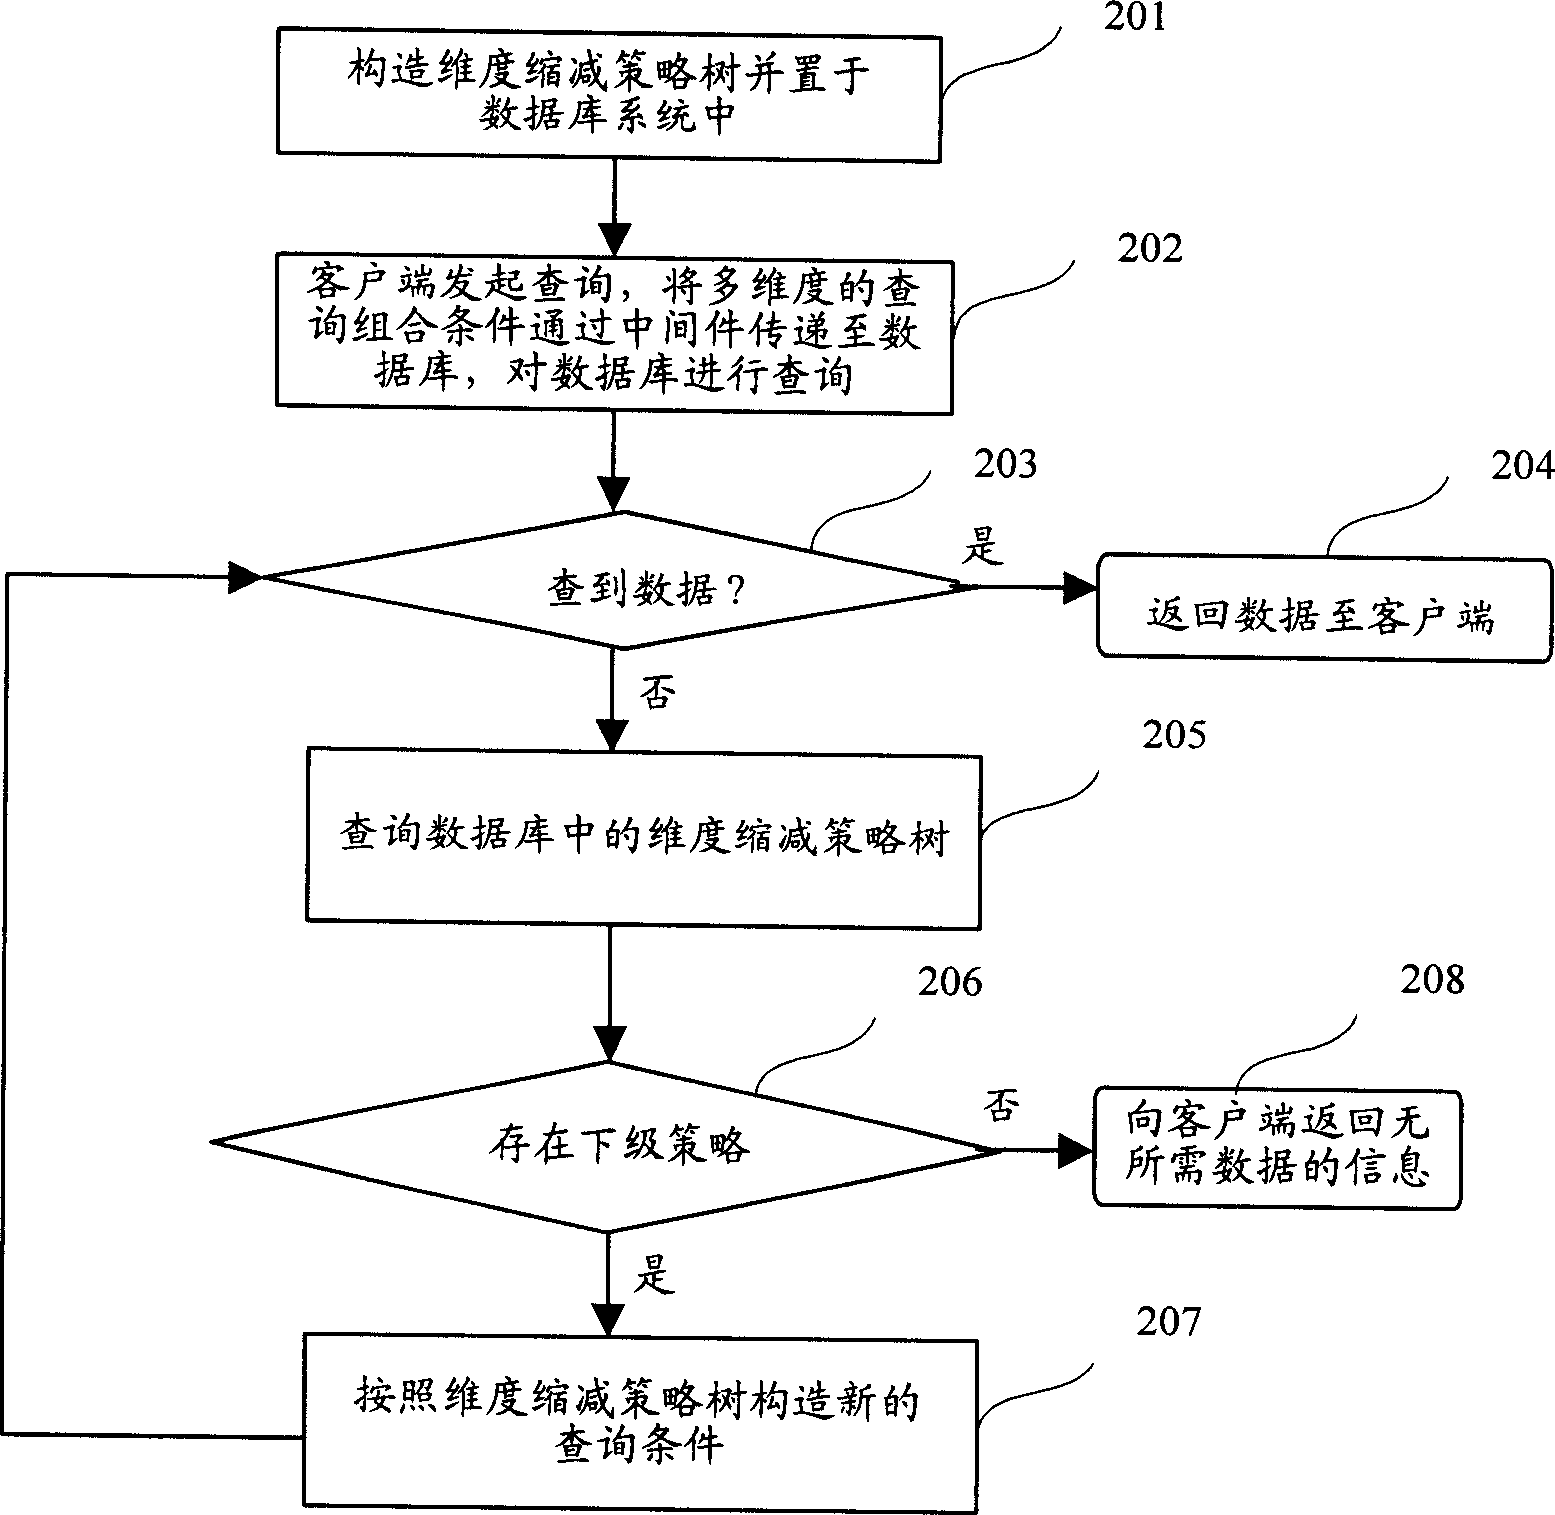 Information searching method and device in relation ship data bank